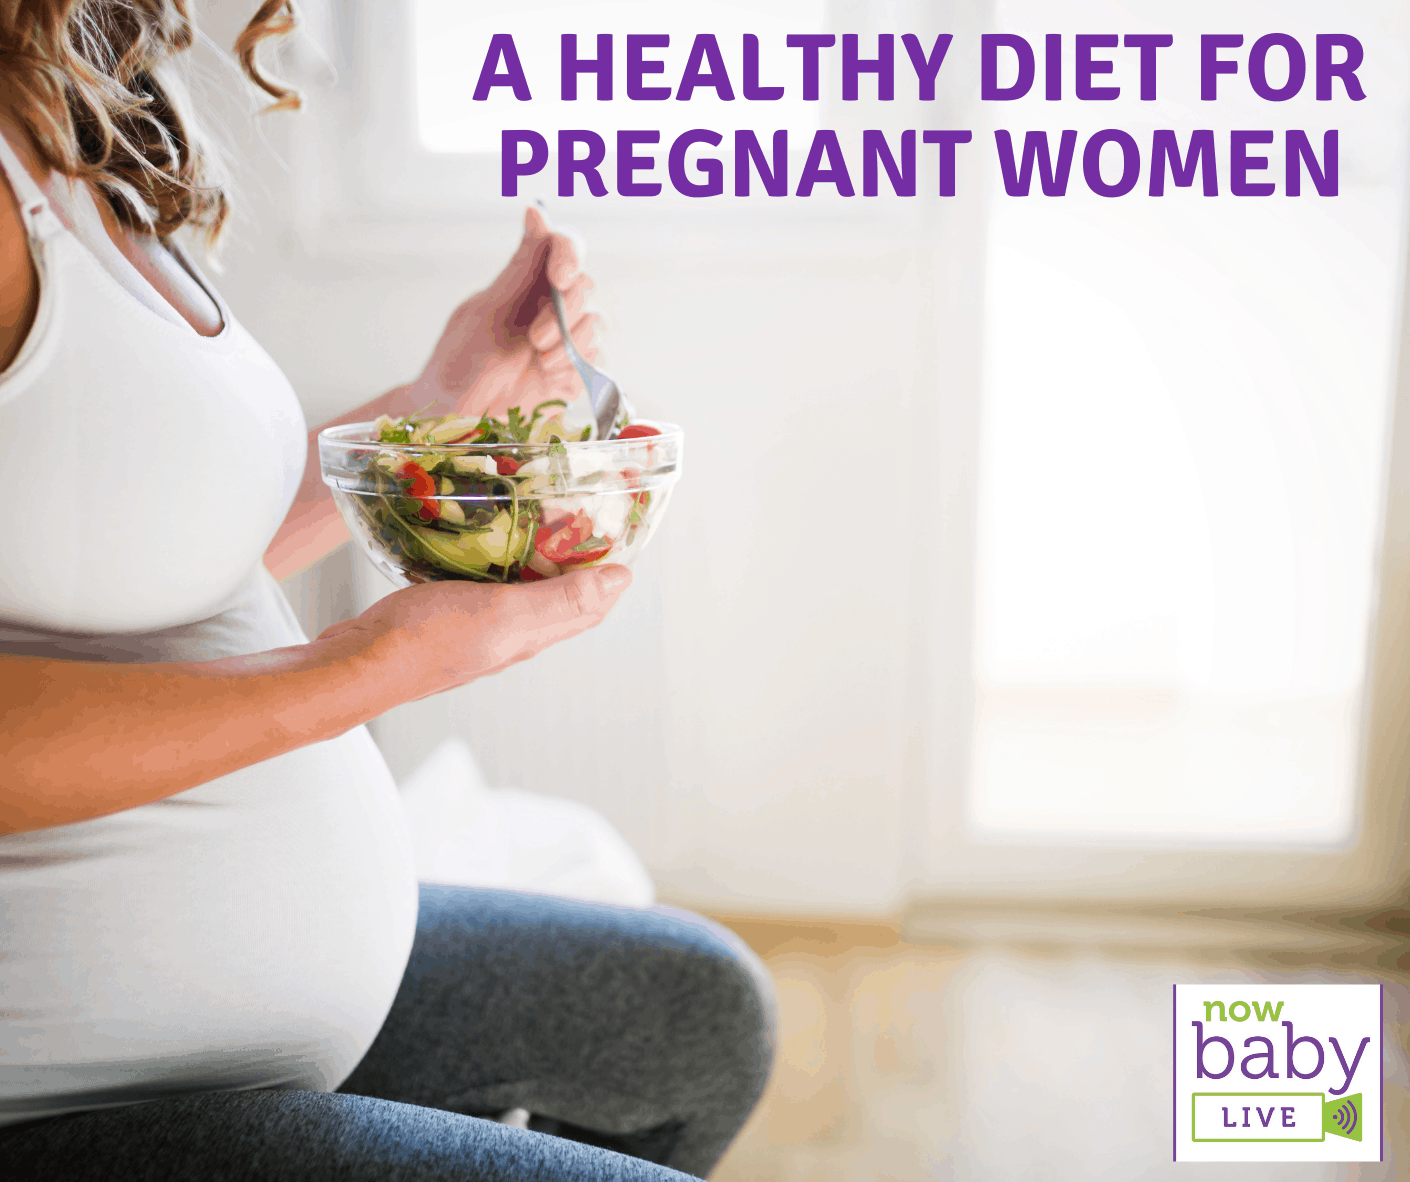 A Healthy Diet for Pregnant Women